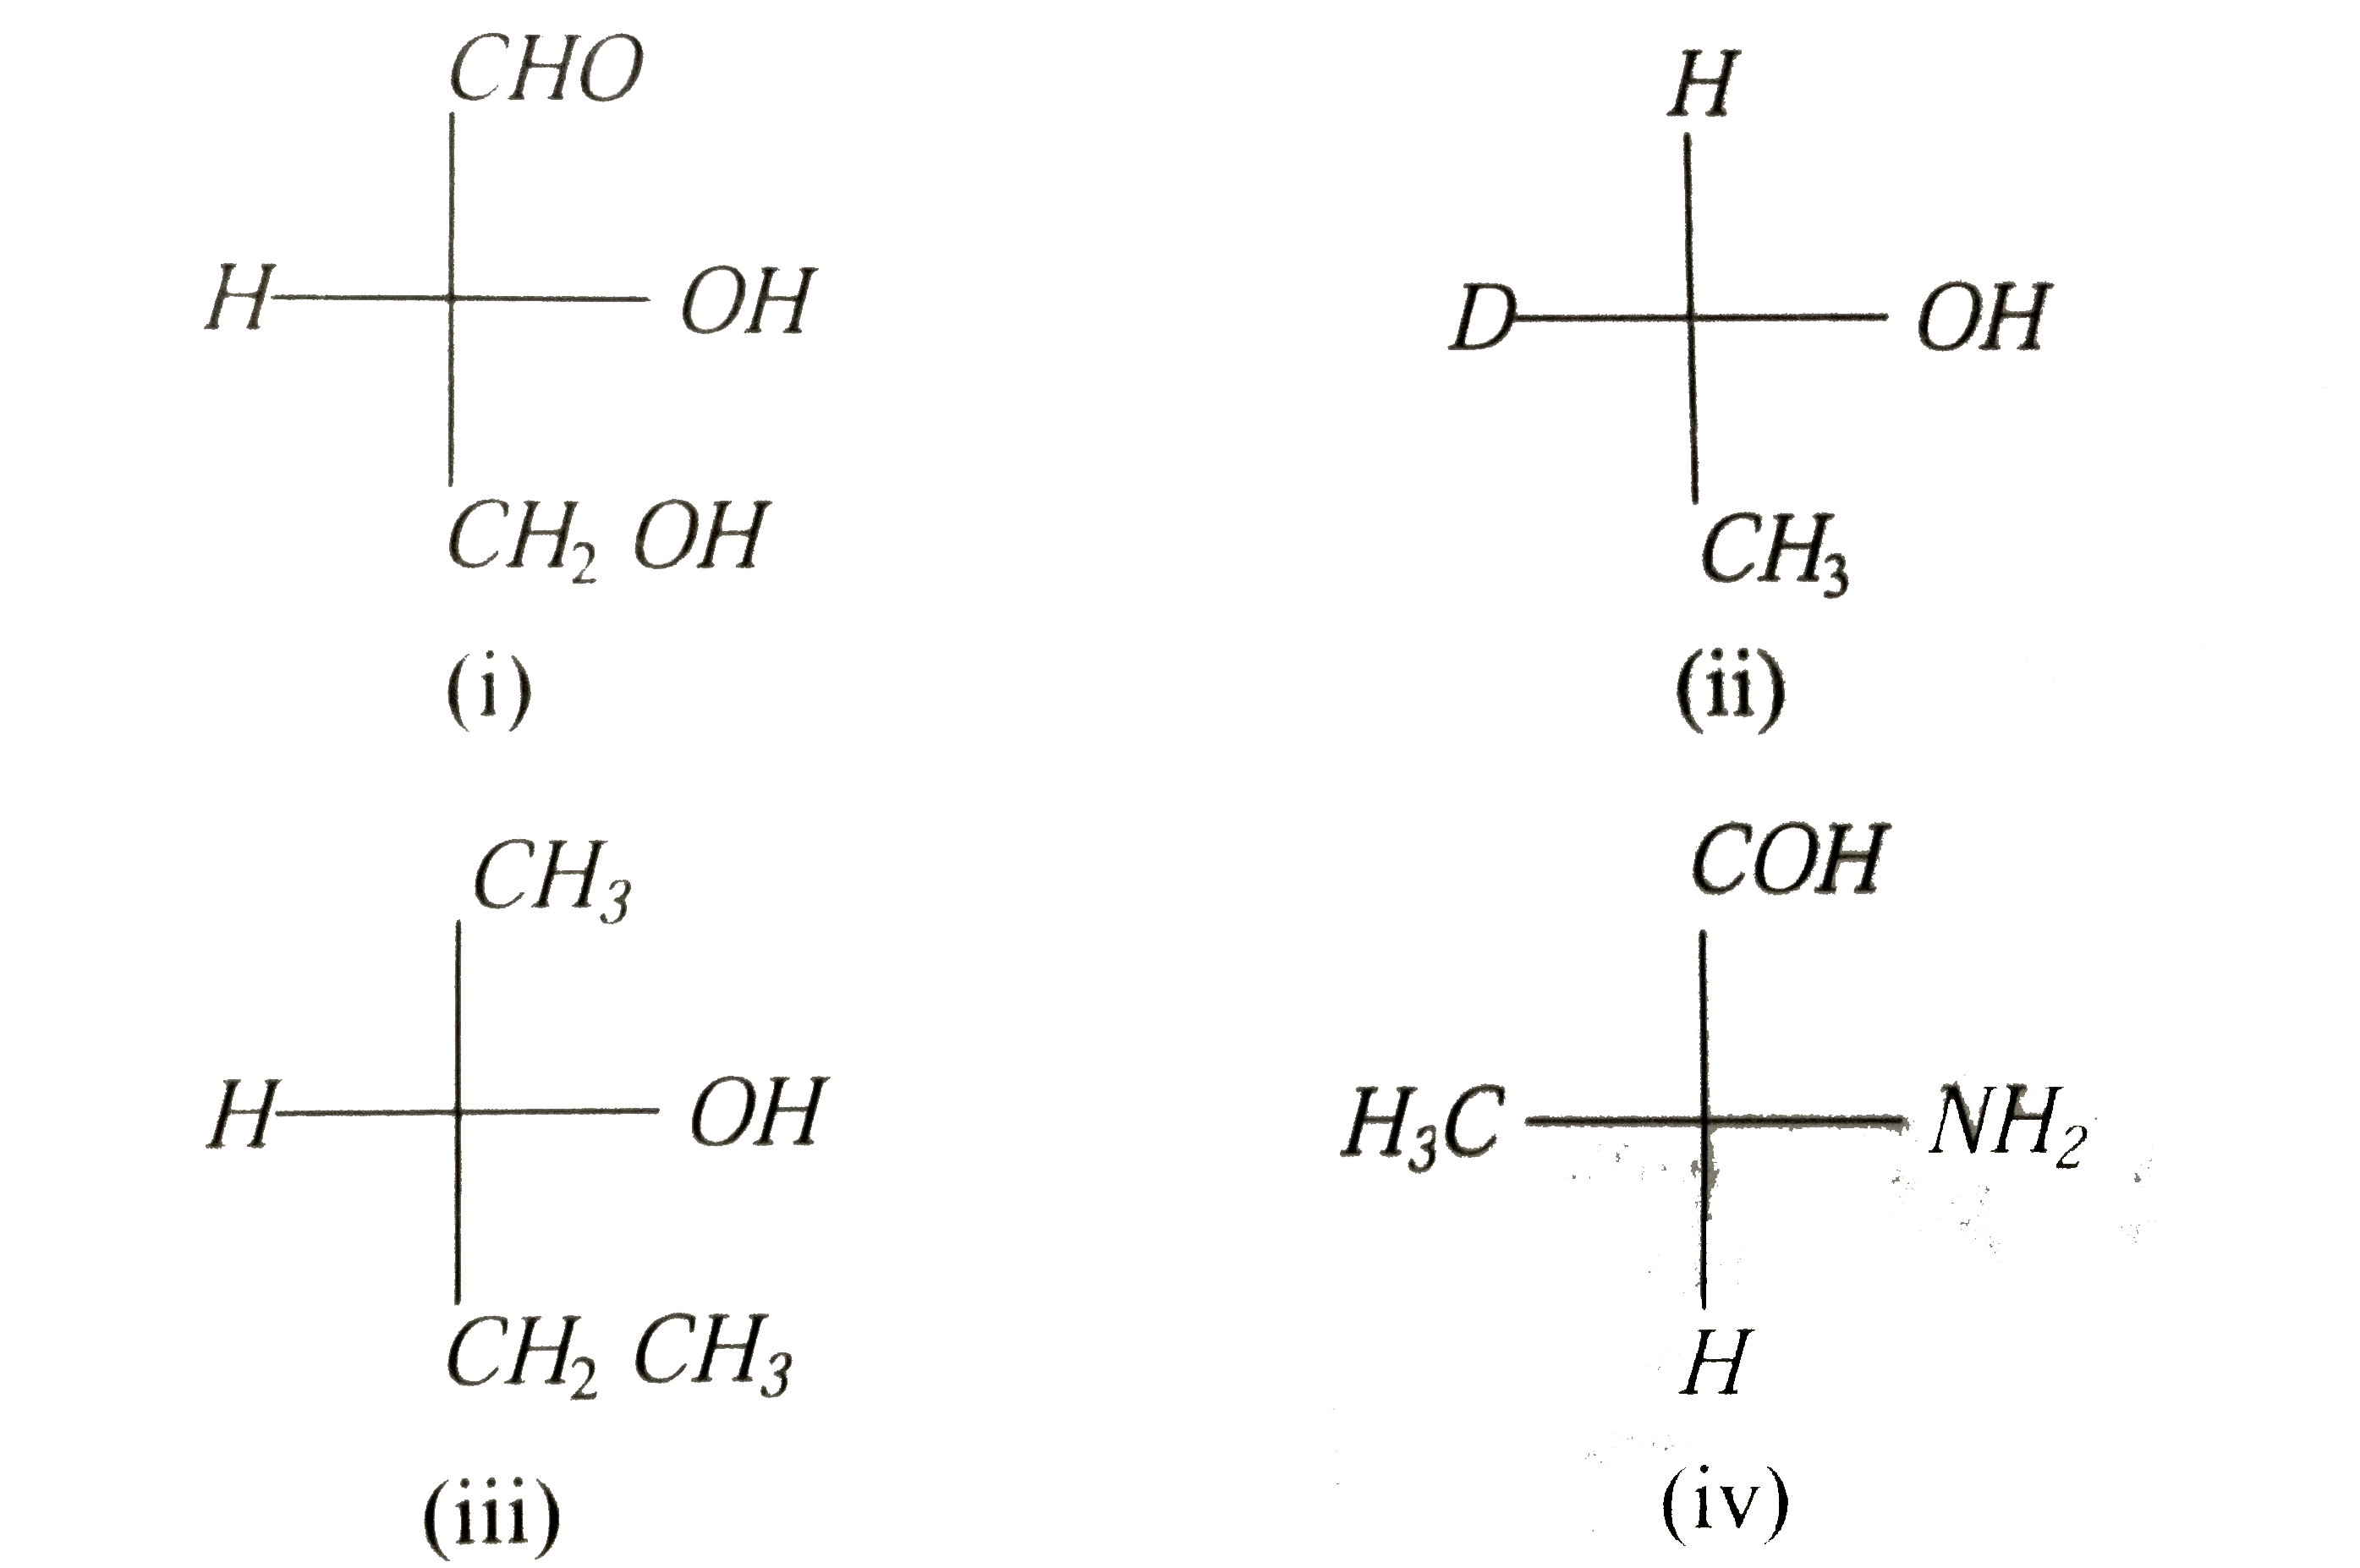 The R-isomers among the following are